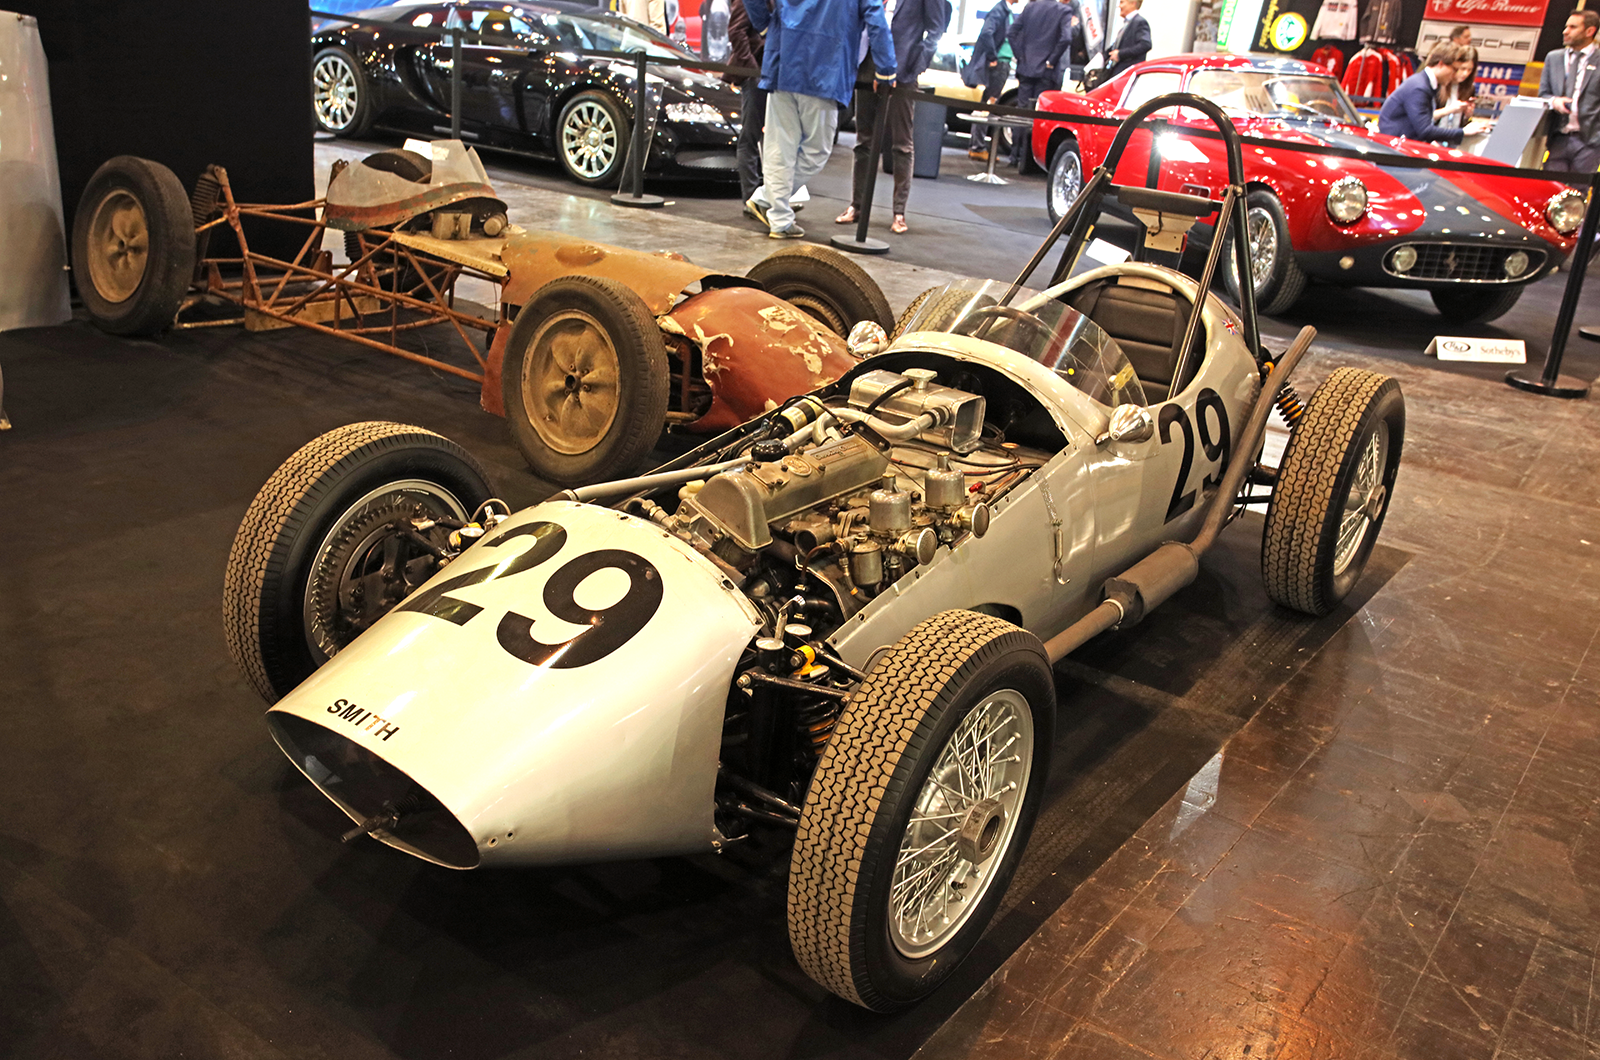 German marques lead the way at Techno-Classica Essen